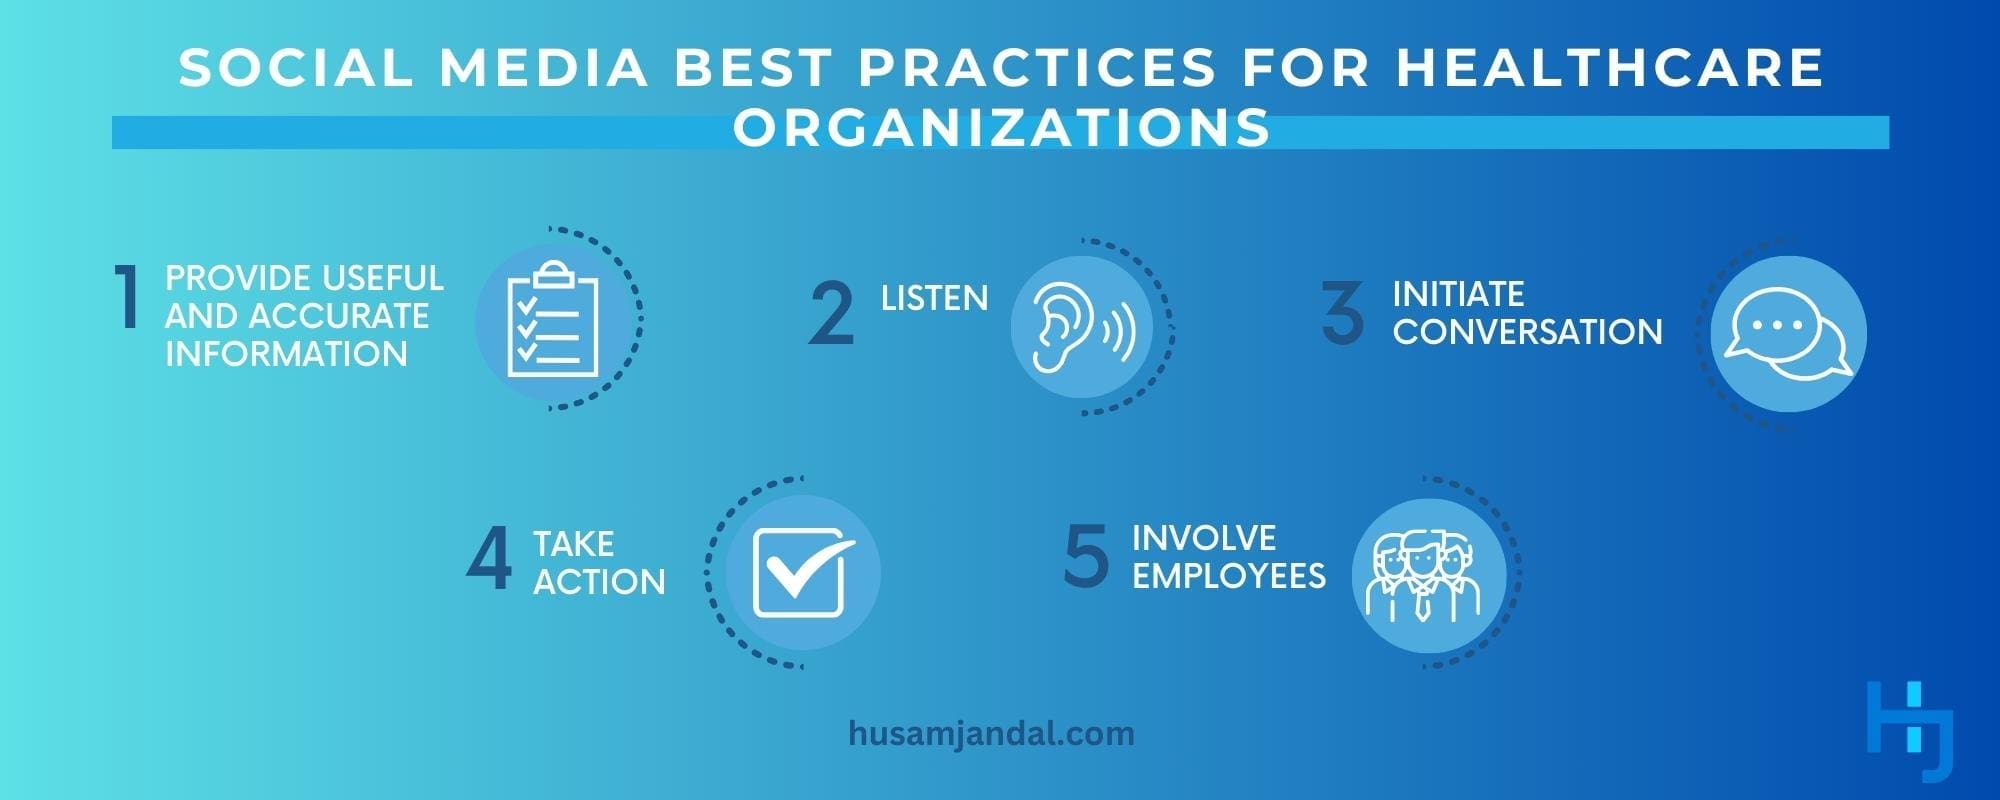 Social Media Best Practices for Healthcare Organizations